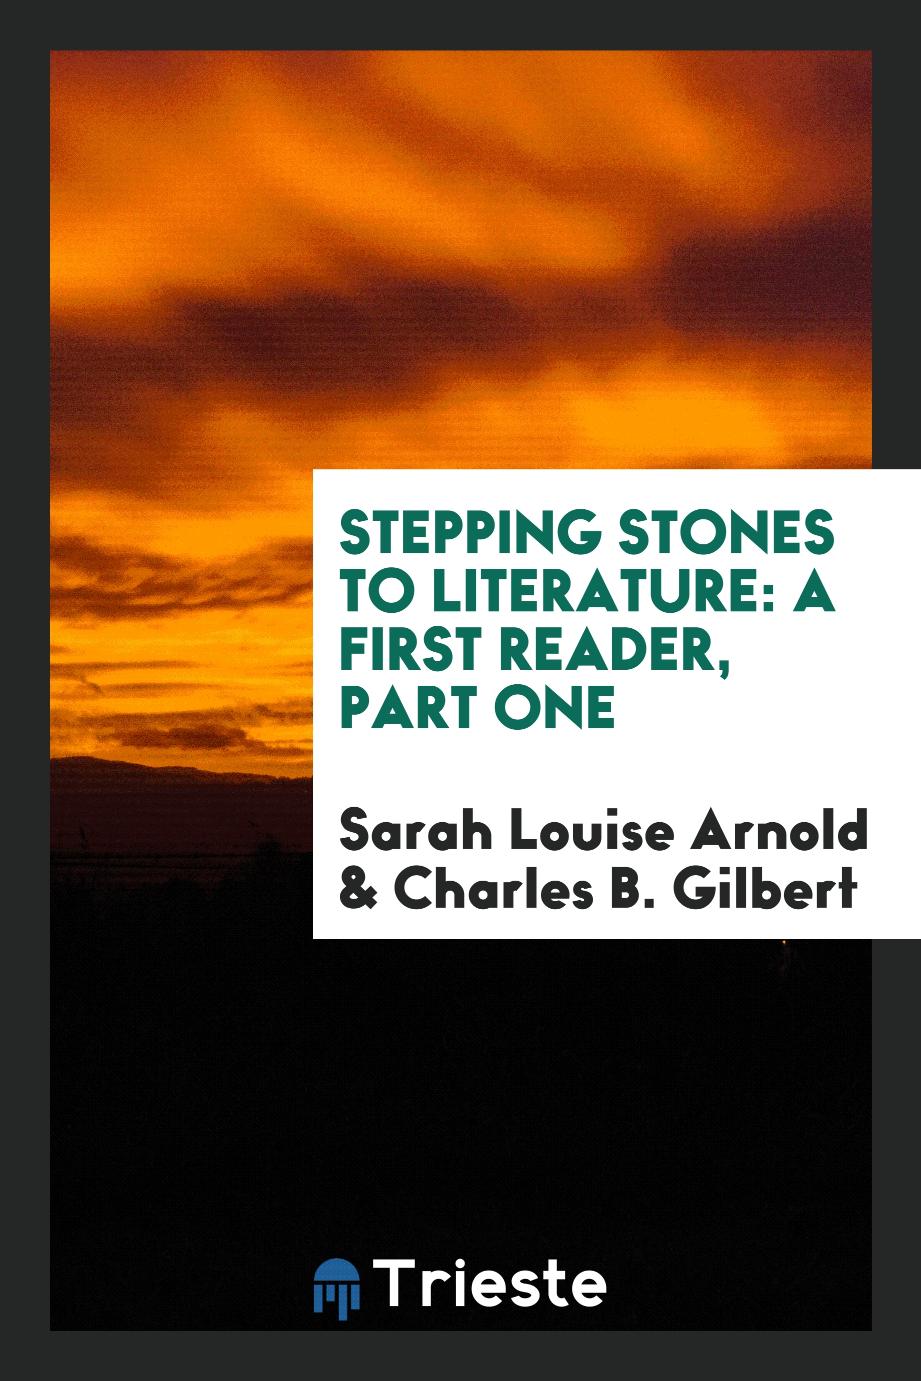 Stepping Stones to Literature: A First Reader, Part One